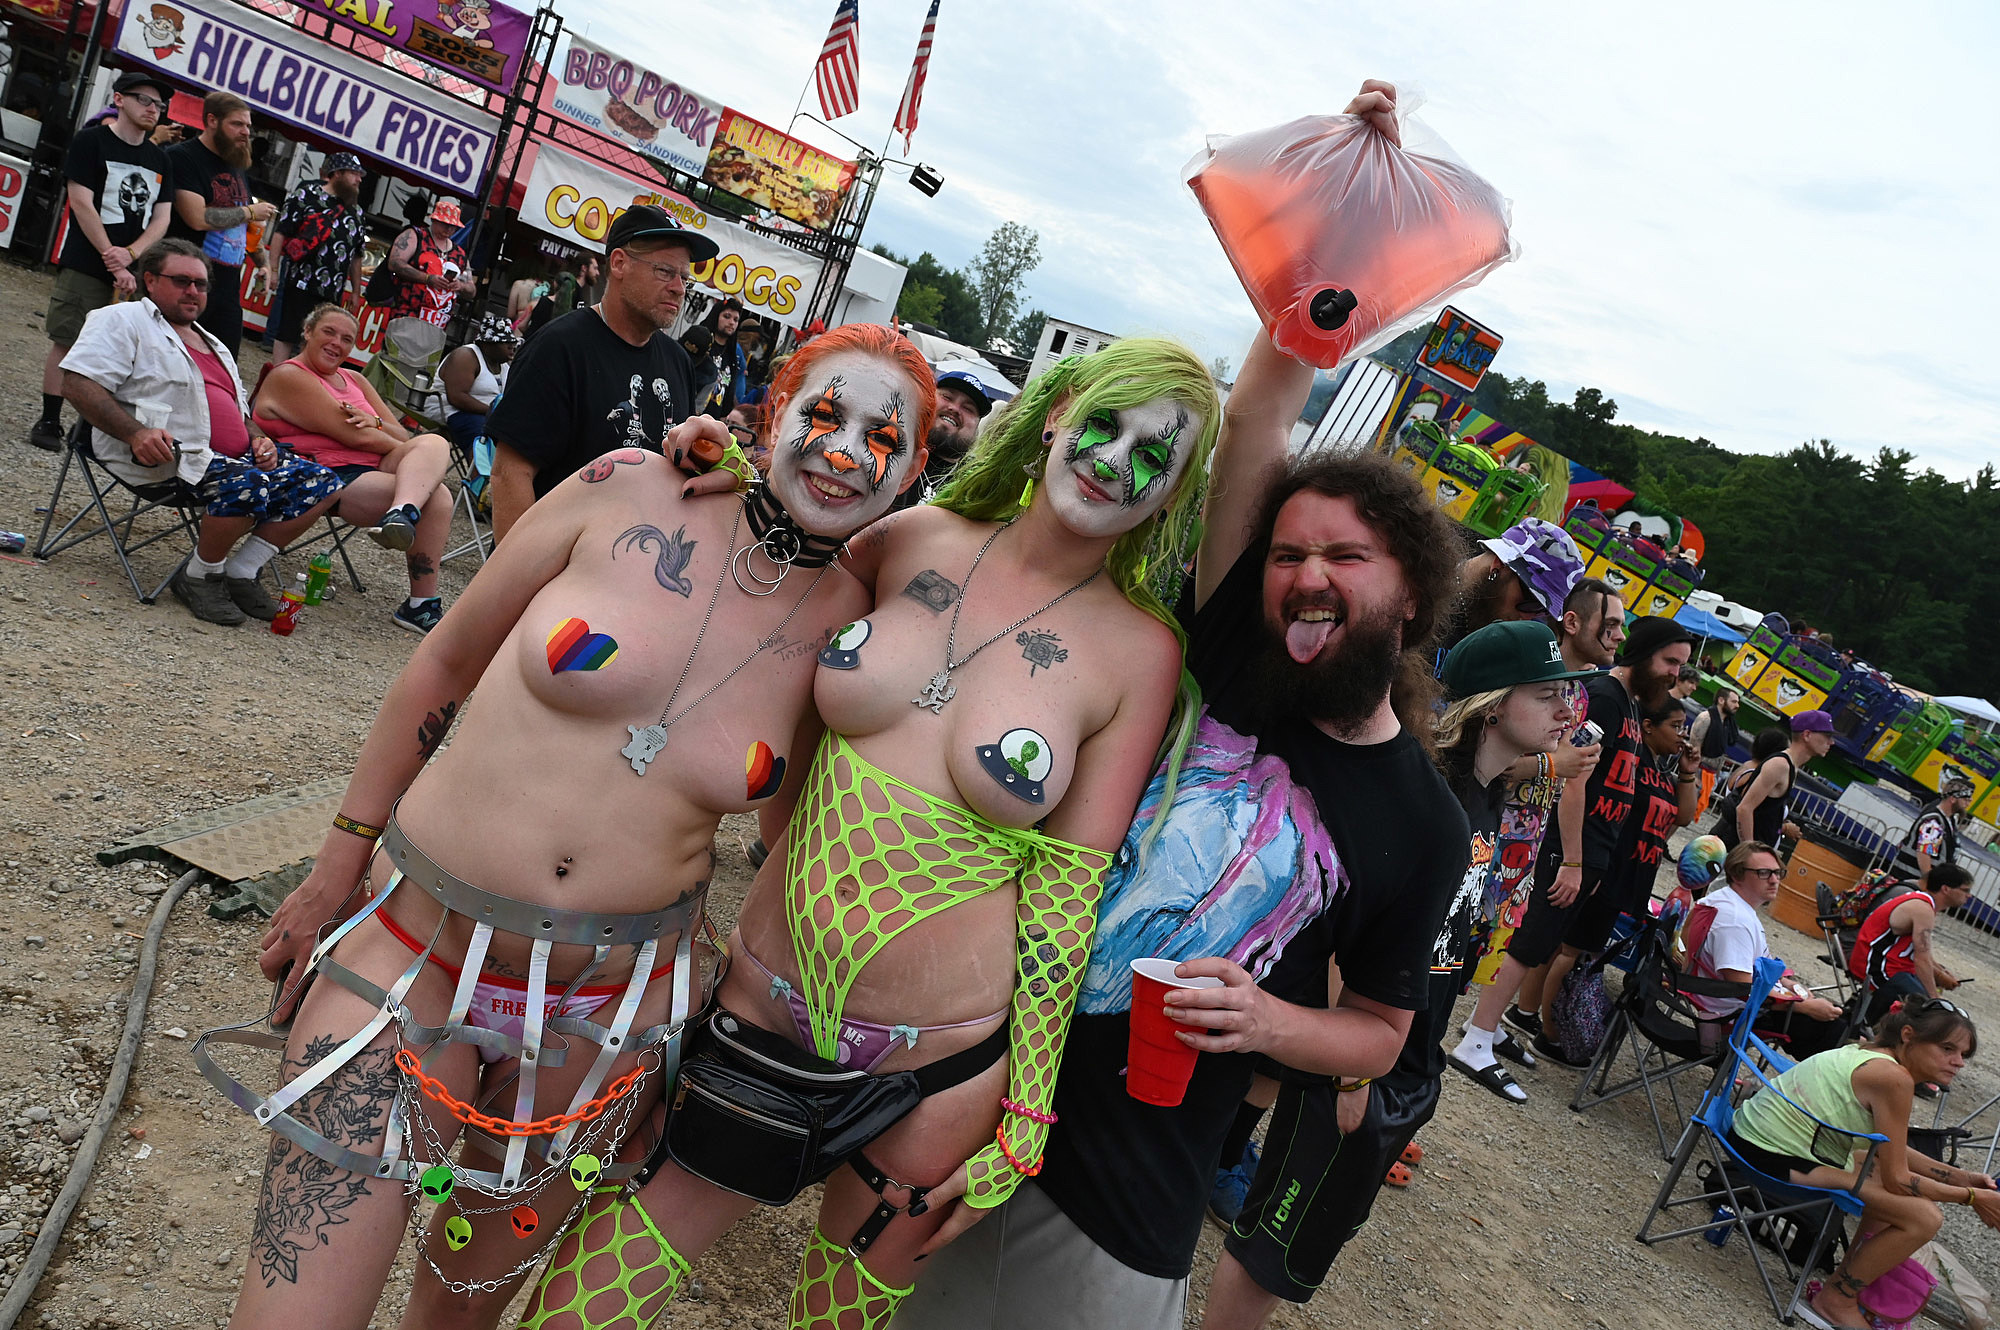 amber pencz share gathering of the juggalos uncensored photos